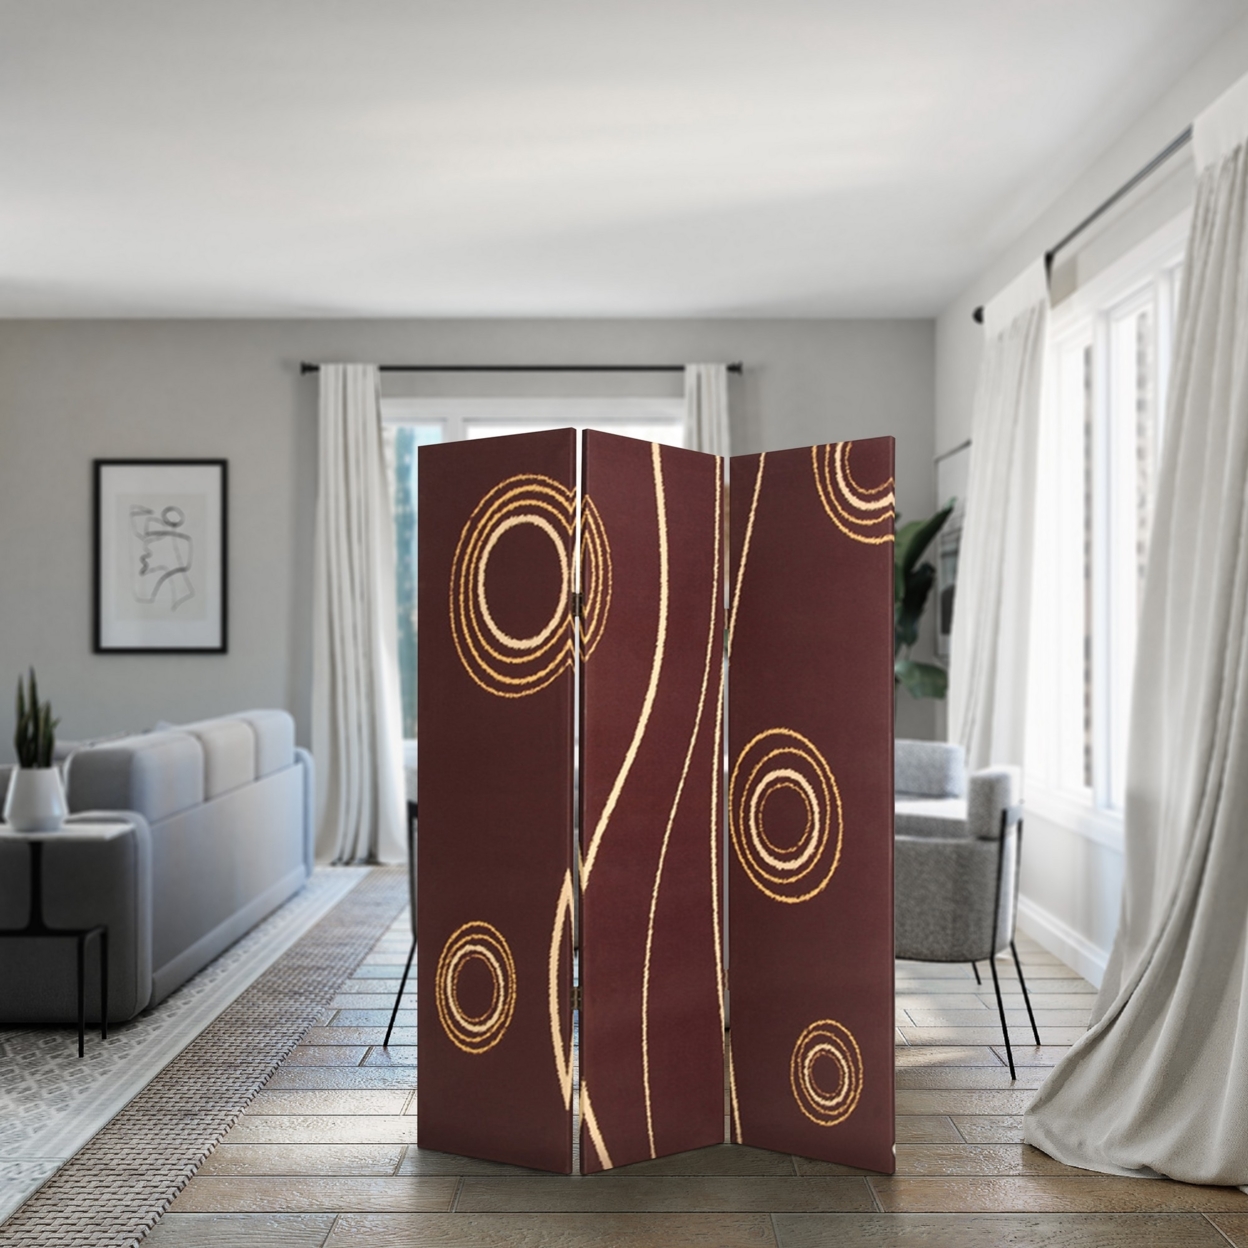 3 Panel Foldable Canvas Room Divider With Circle Design, Brown And Yellow- Saltoro Sherpi